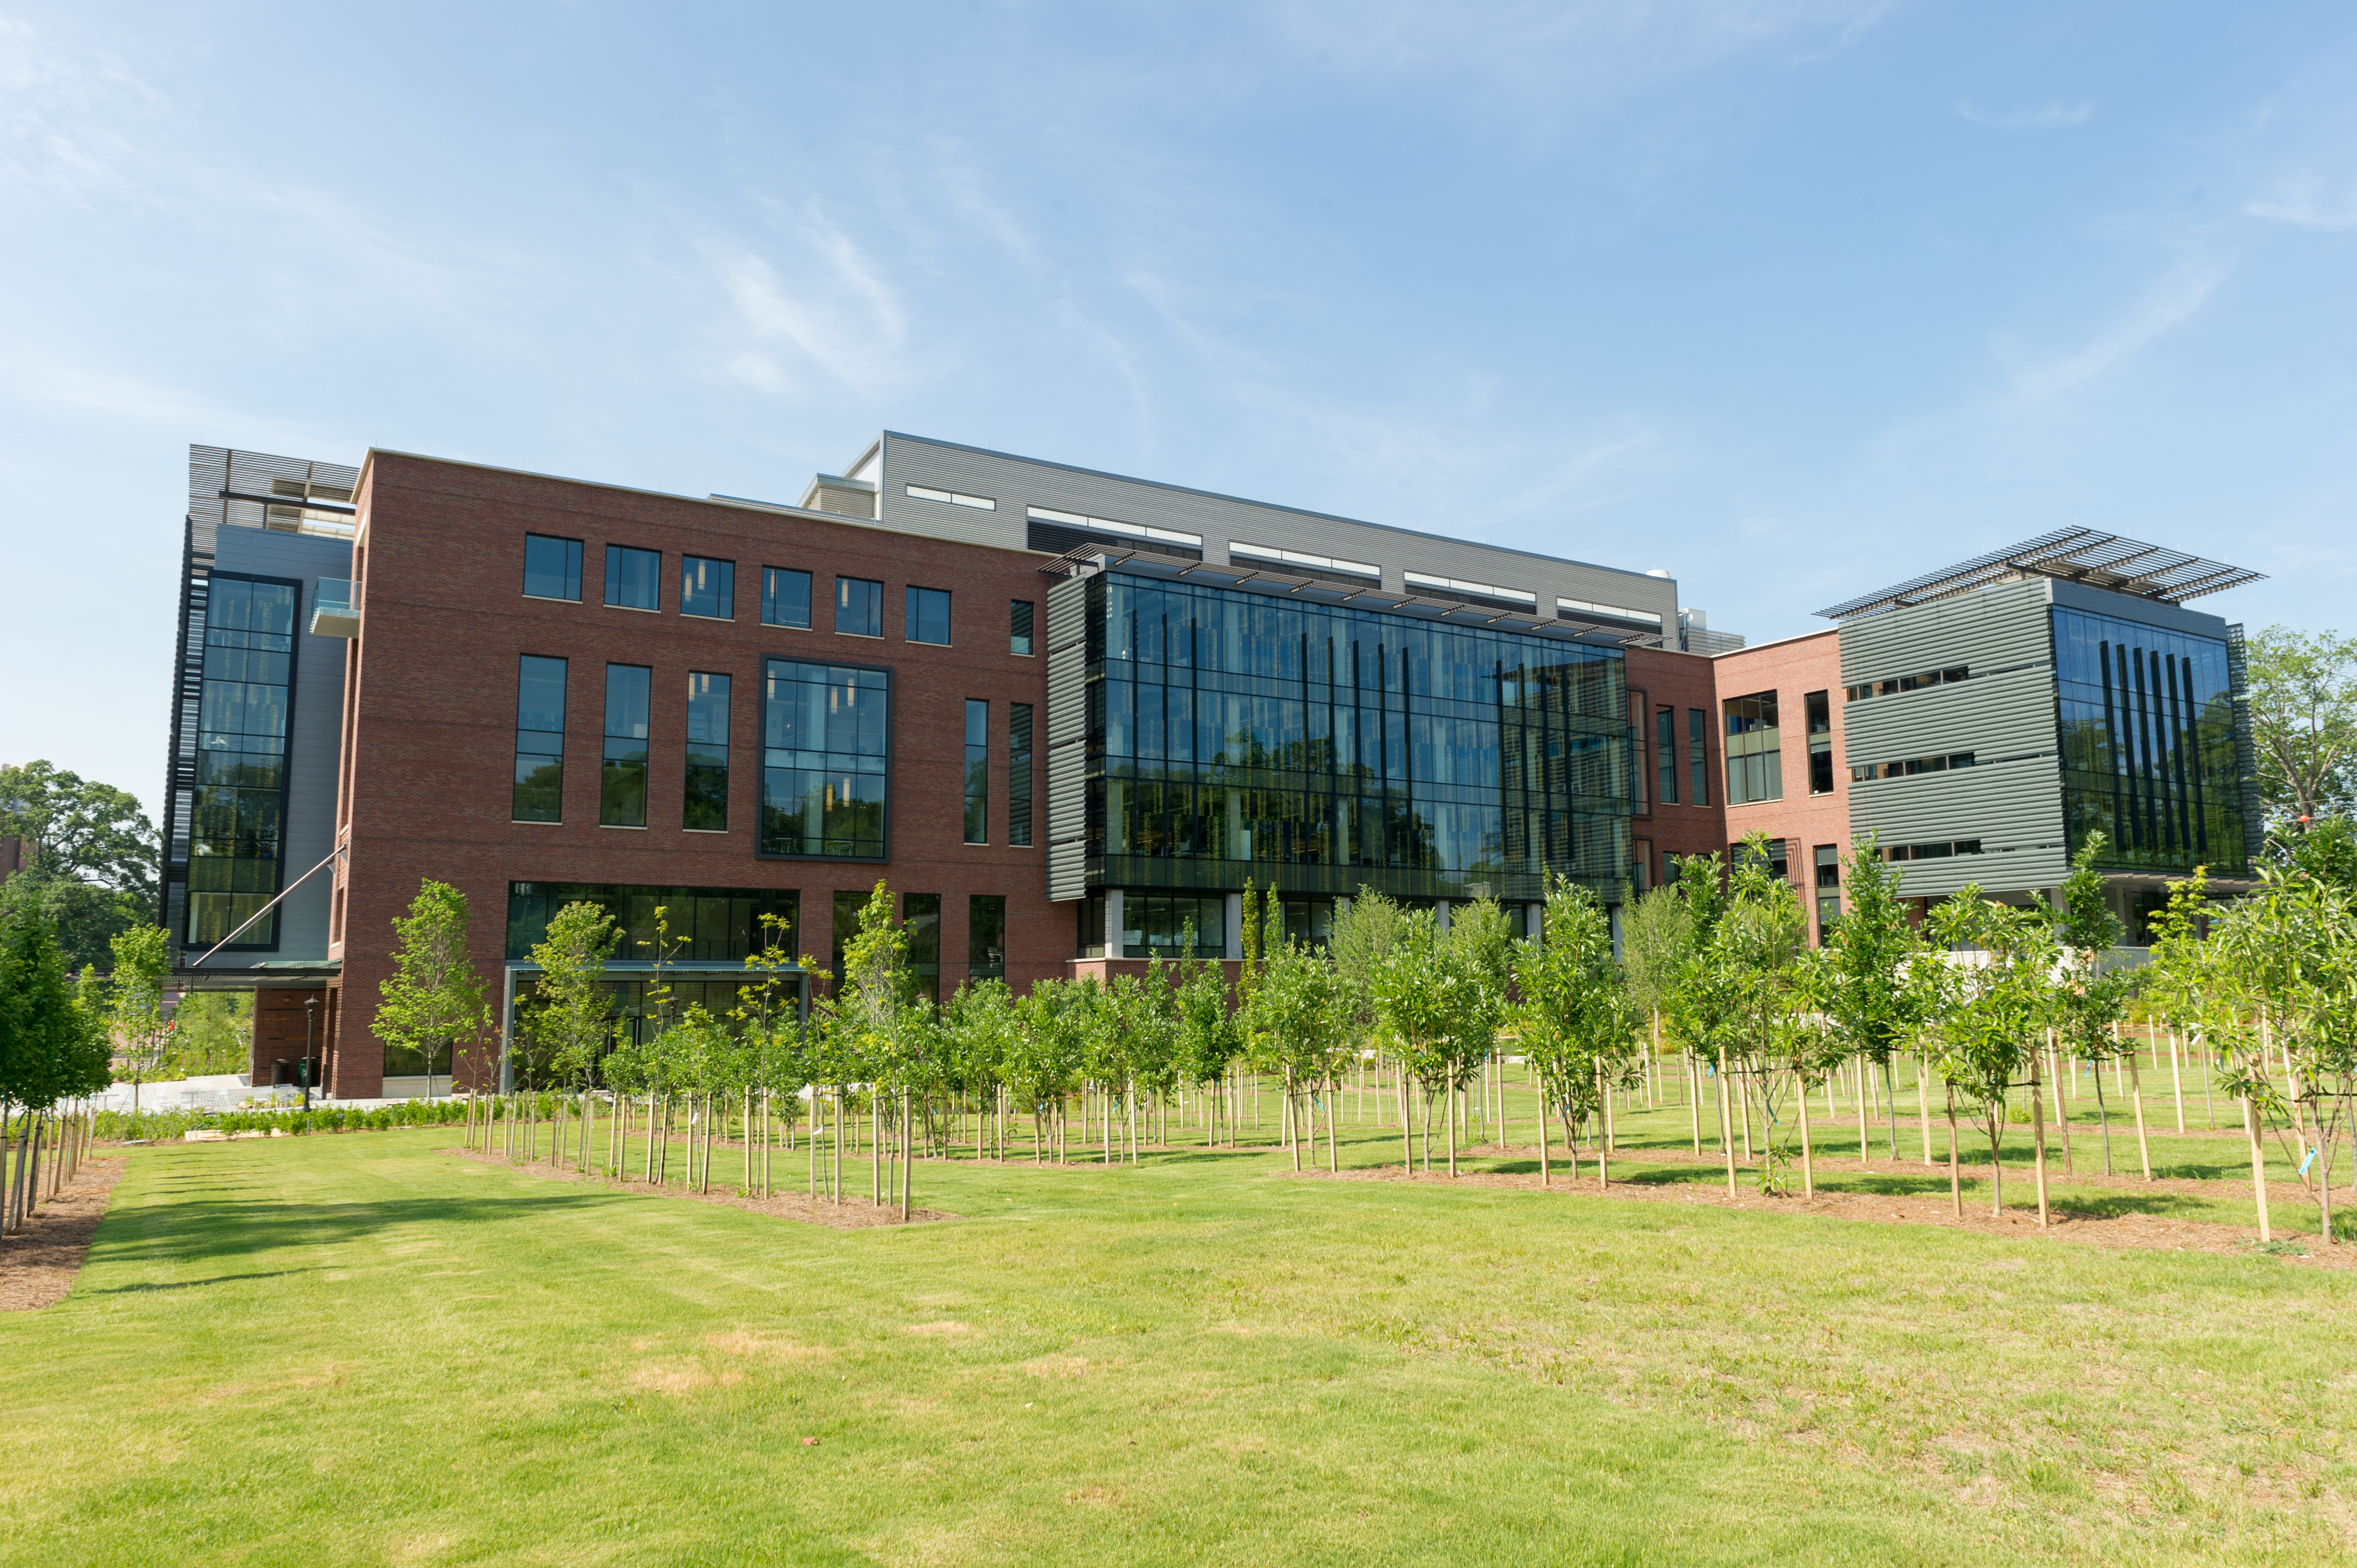 The Engineered Biosystems Building provides nearly 219,000 square feet of multidisciplinary research space. It is located on 10th Street, at the north end of the existing biotechnology complex. (Photo by Rob Felt)